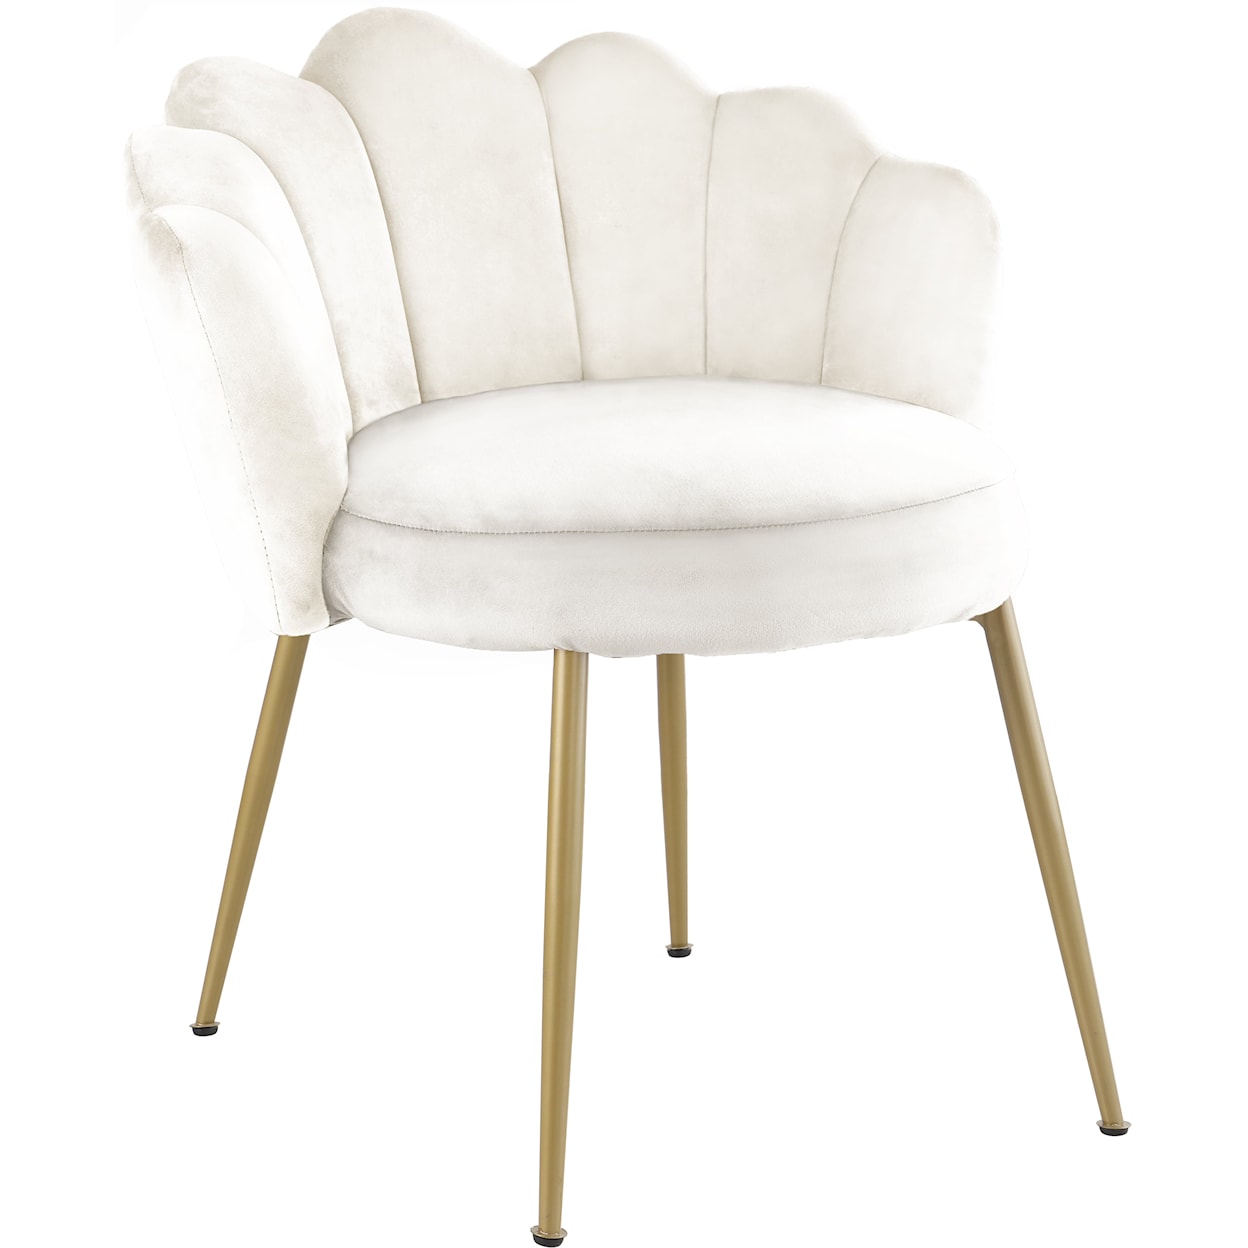 Meridian Furniture Claire Dining Chair